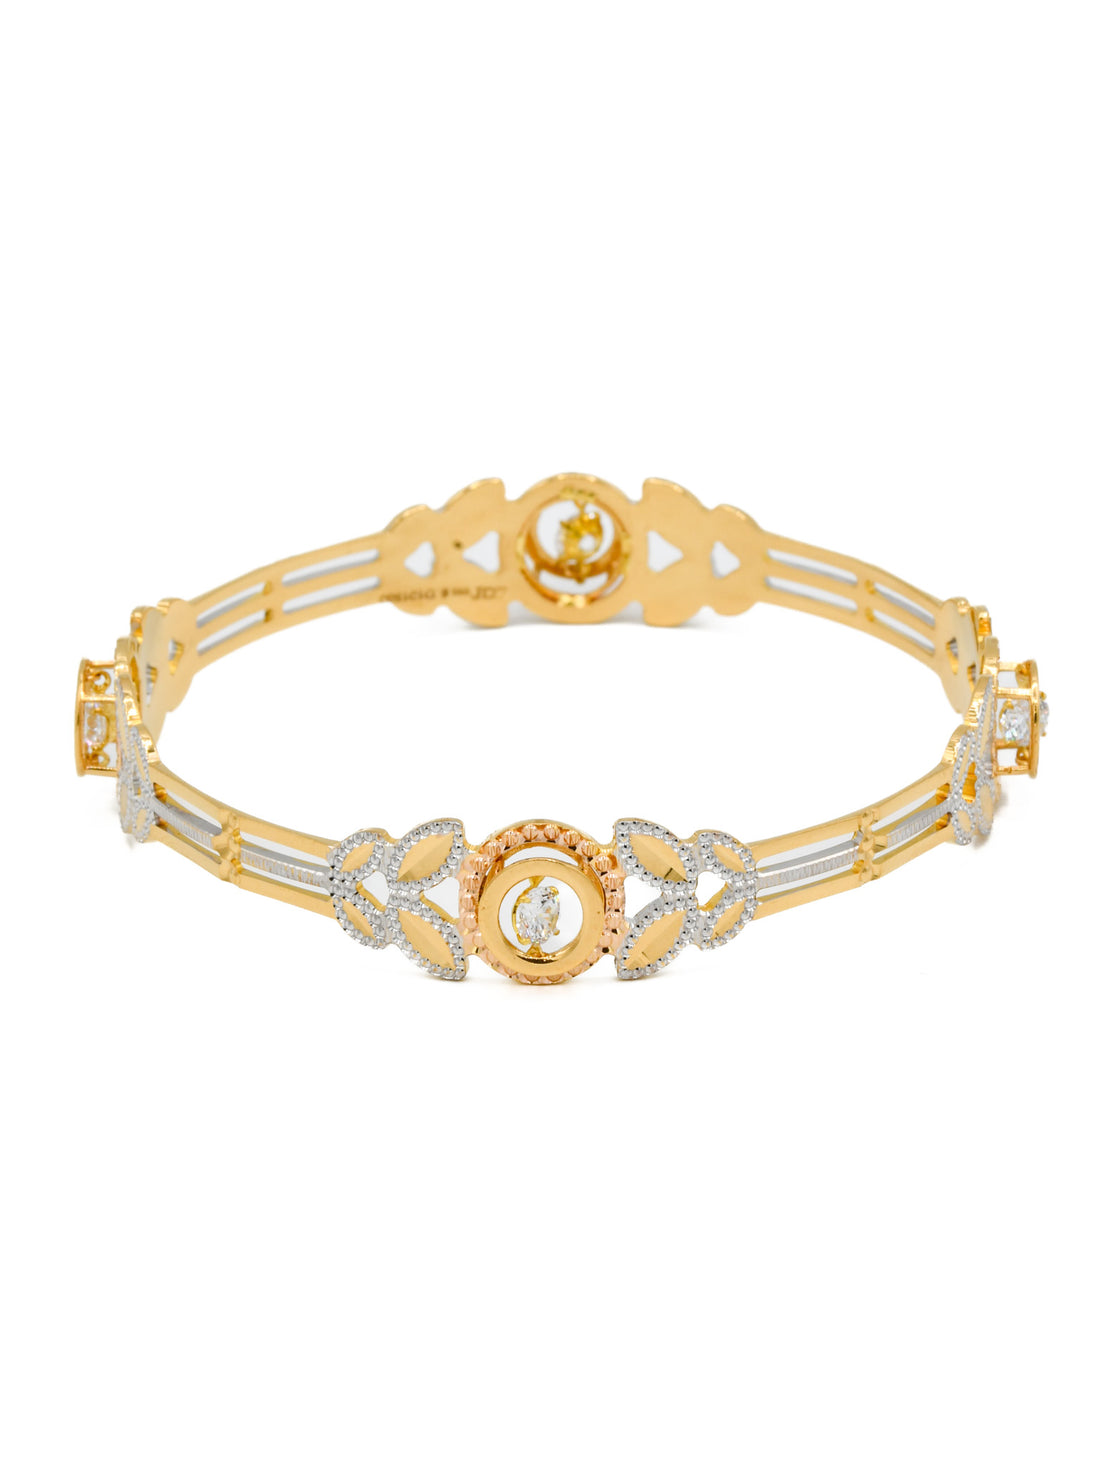 22ct Gold CZ Two Tone Pair Bangle - Roop Darshan